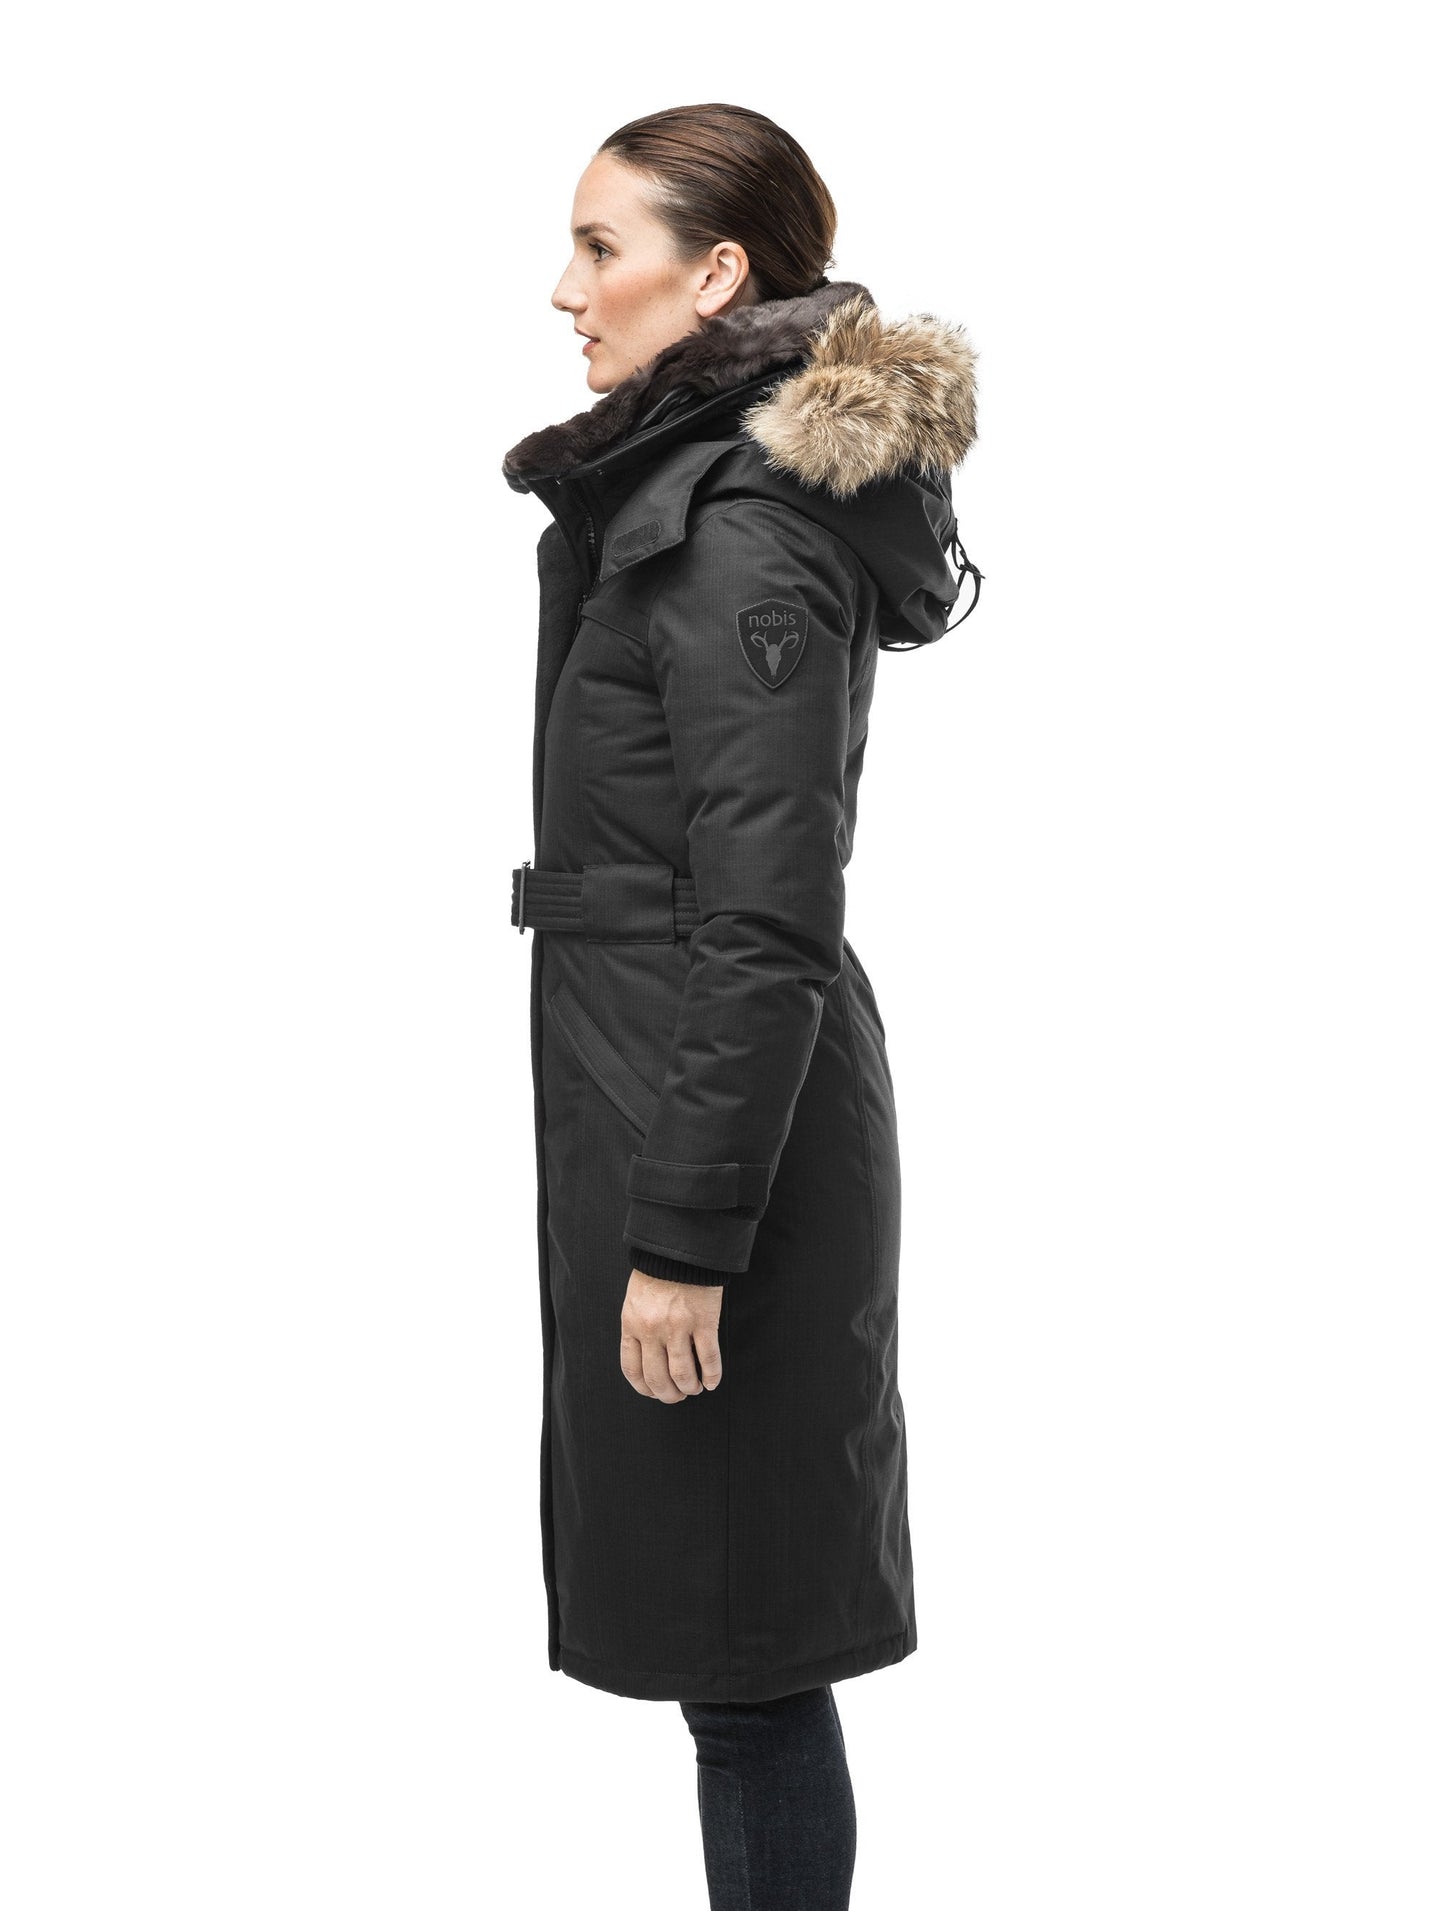 Women's knee length down filled parka with a belted waist and fully removable Coyote and Rex Rabbit fur ruffs in CH Black